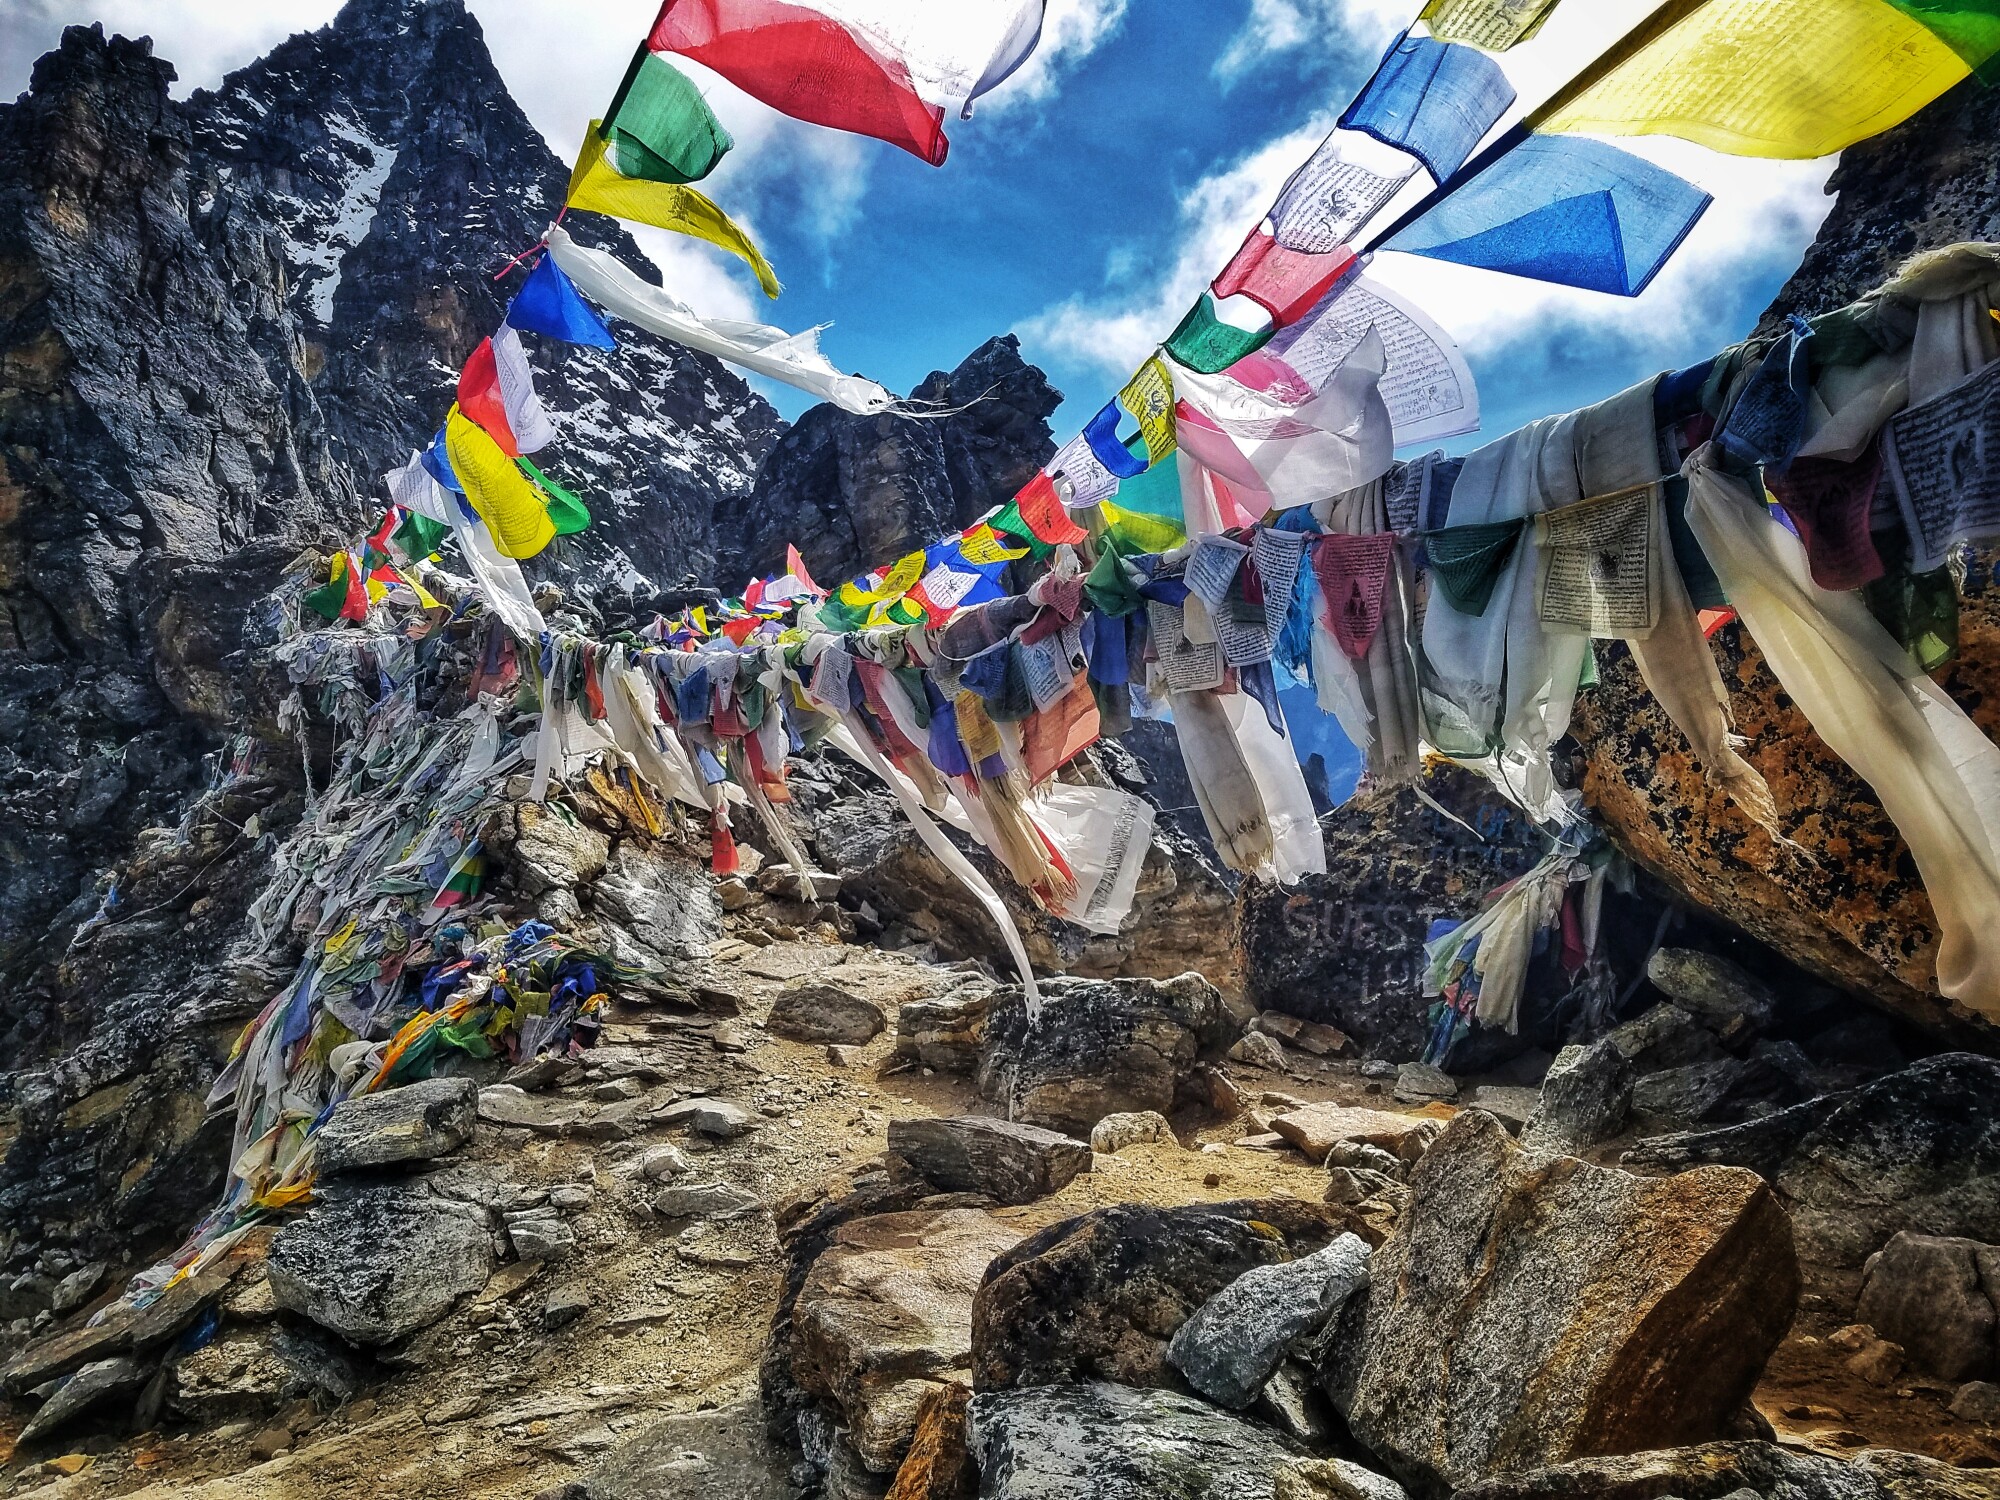 Prayer flags are strung across the summit of Renjo La Pass in the Himalayas.